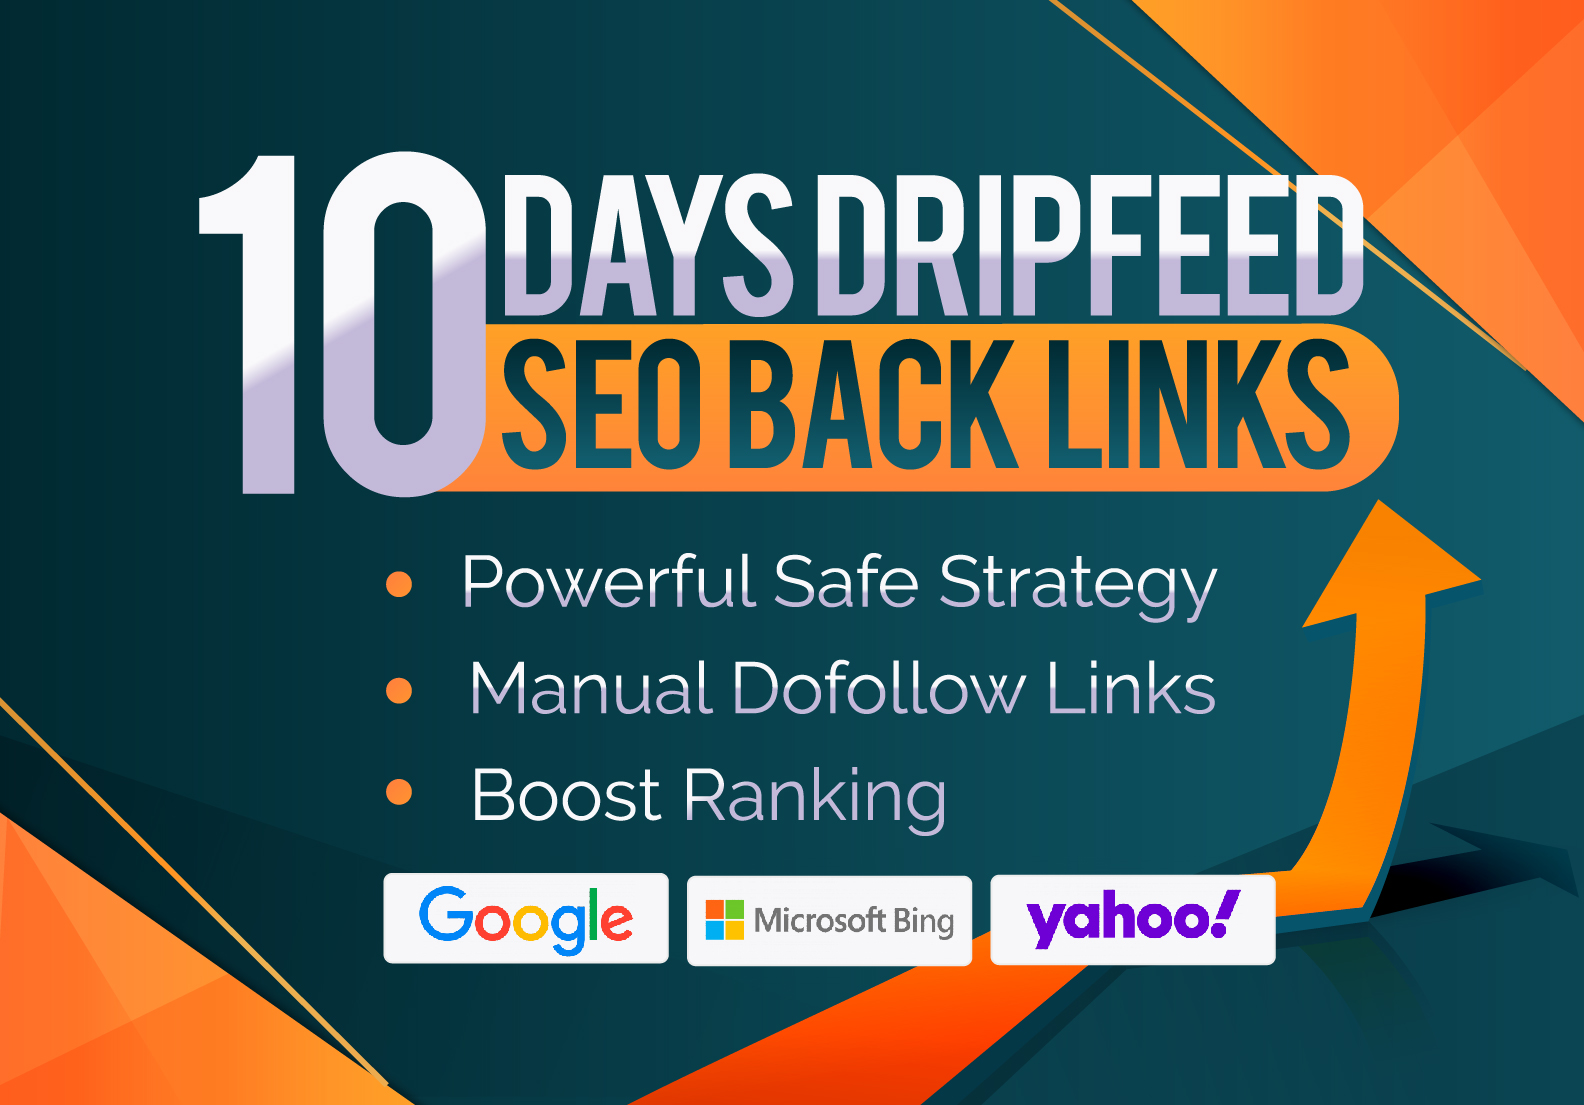 Achieve Top Rankings with Our 10-Day Dripfeed SEO Backlinks Service